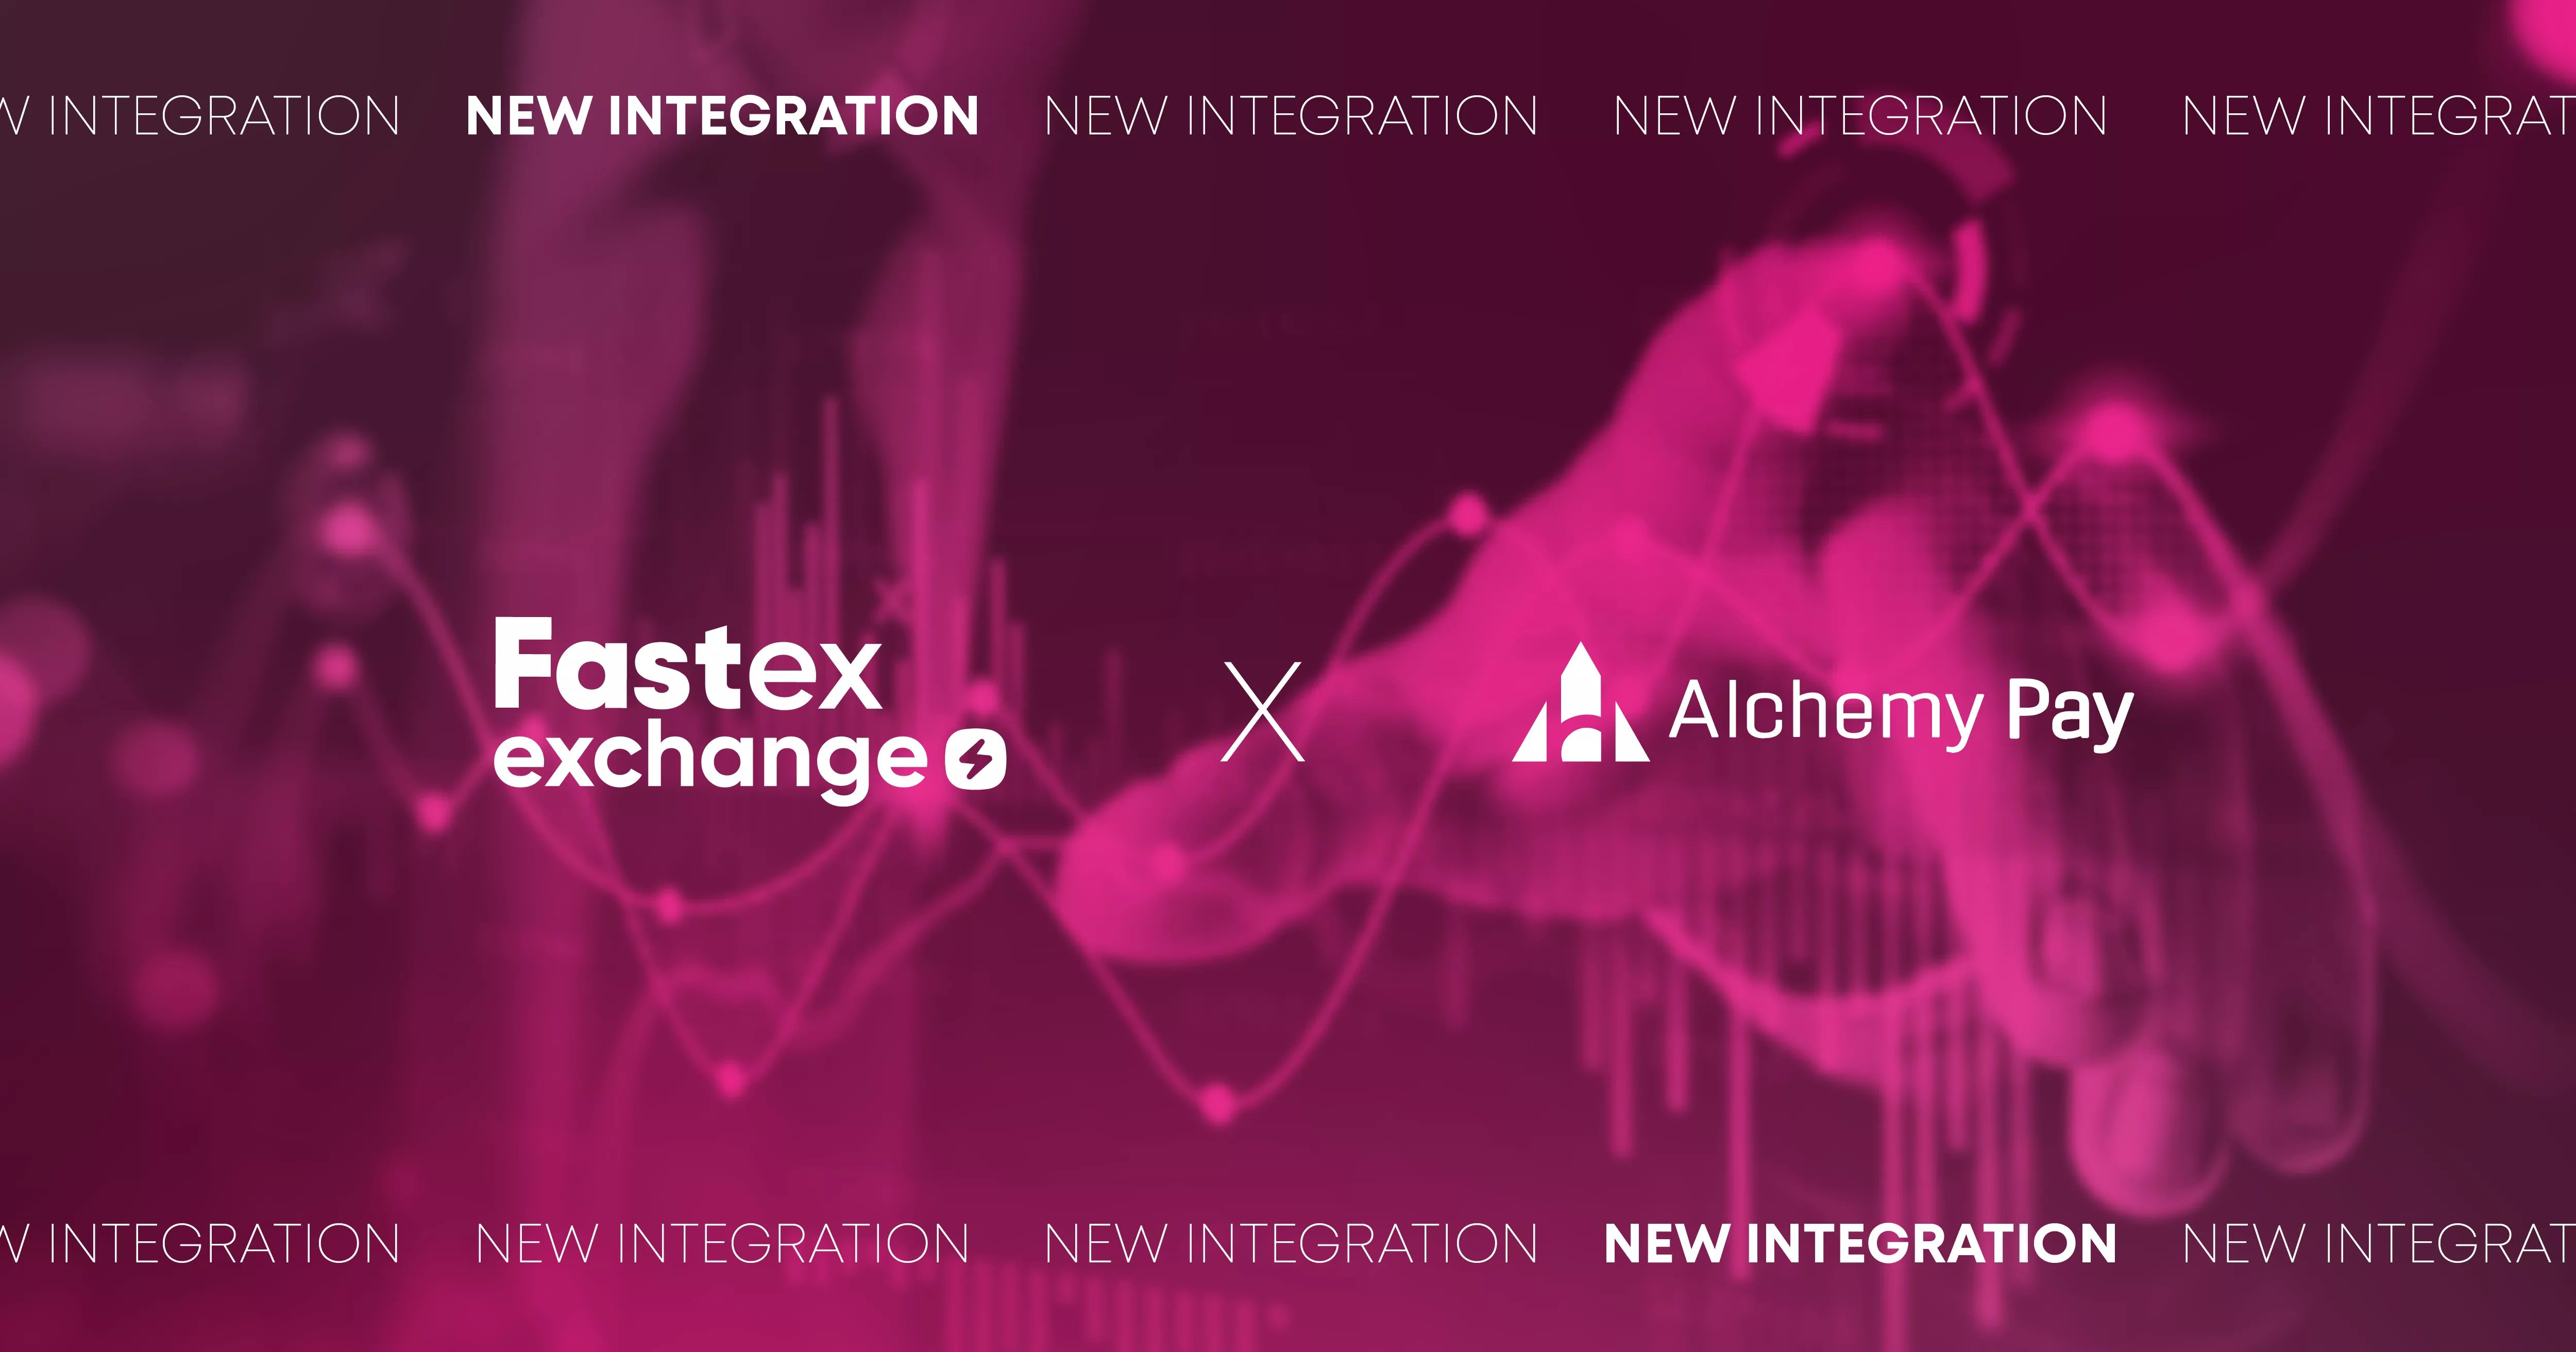 Fastex Exchange Integrates Alchemy Pay for Enhanced Payment Options